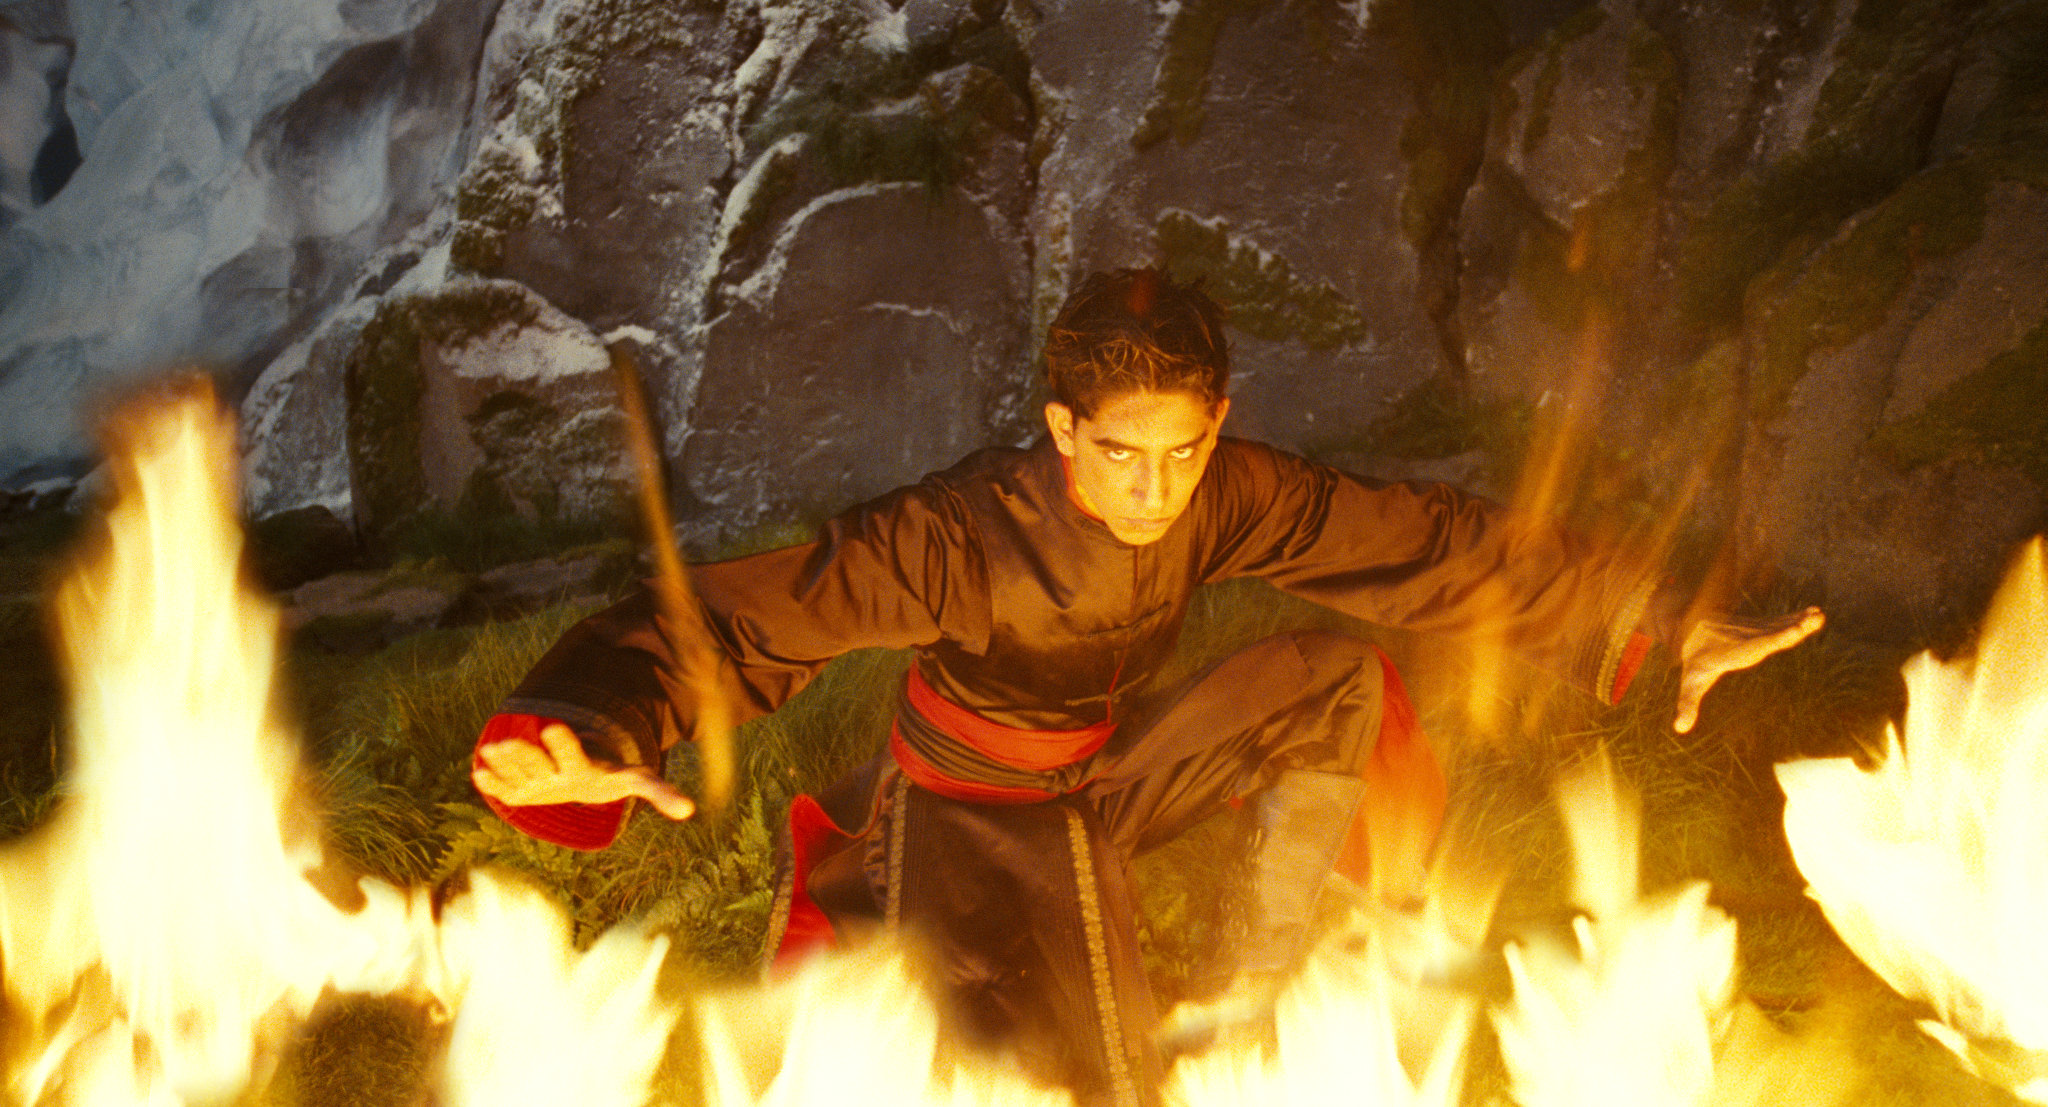  Dev Patel stars as Zuko in Paramount Pictures' &quot;The Last Airbender&quot;.